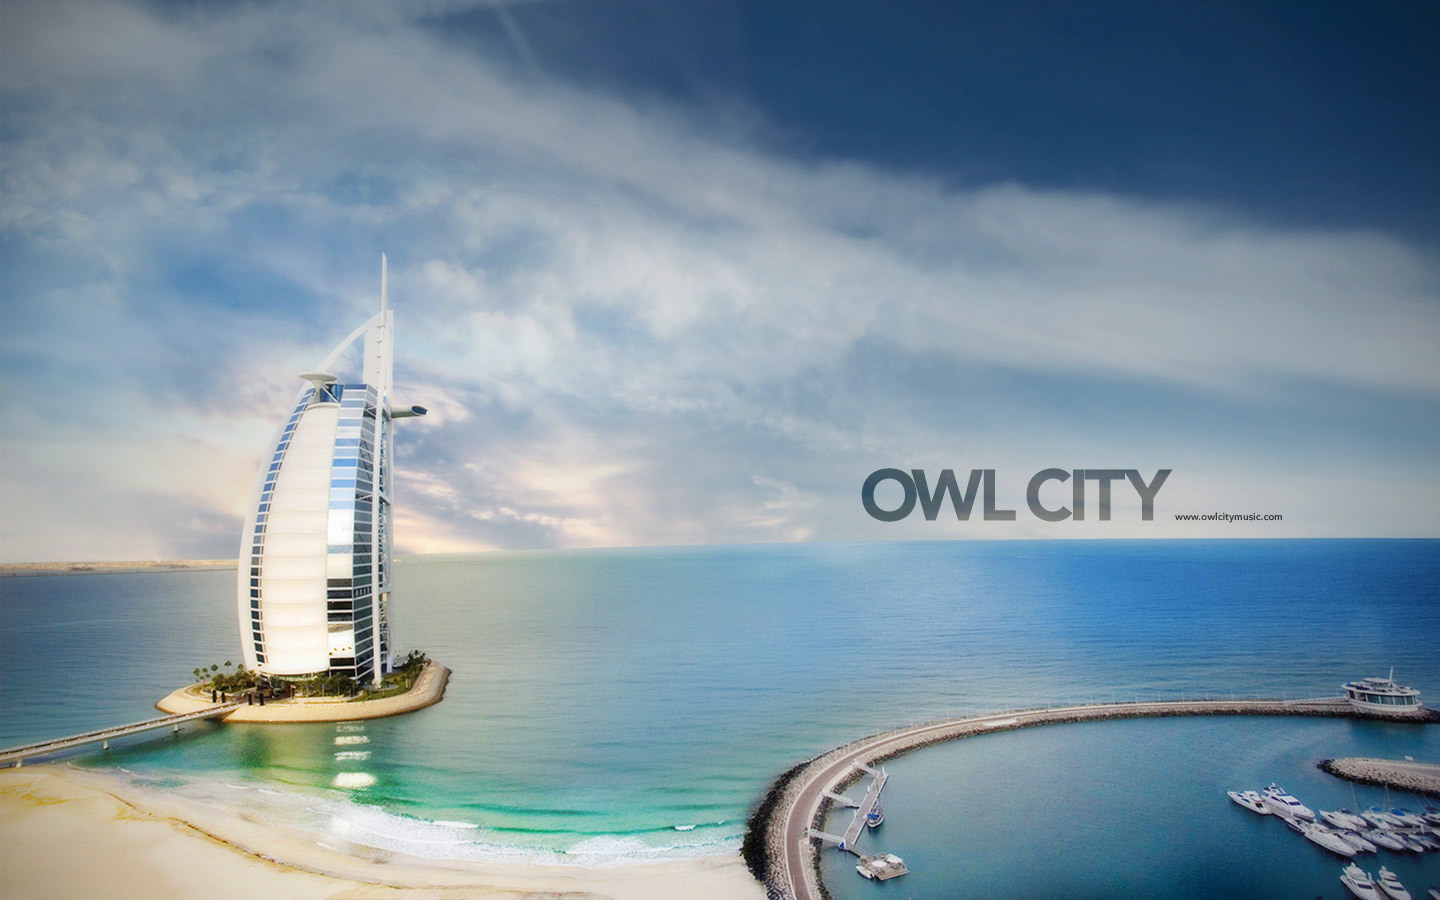 Google Backgrounds Wallpaper on Owl City Beach 1440x900 Google Image Search Results Hd Wallpaper